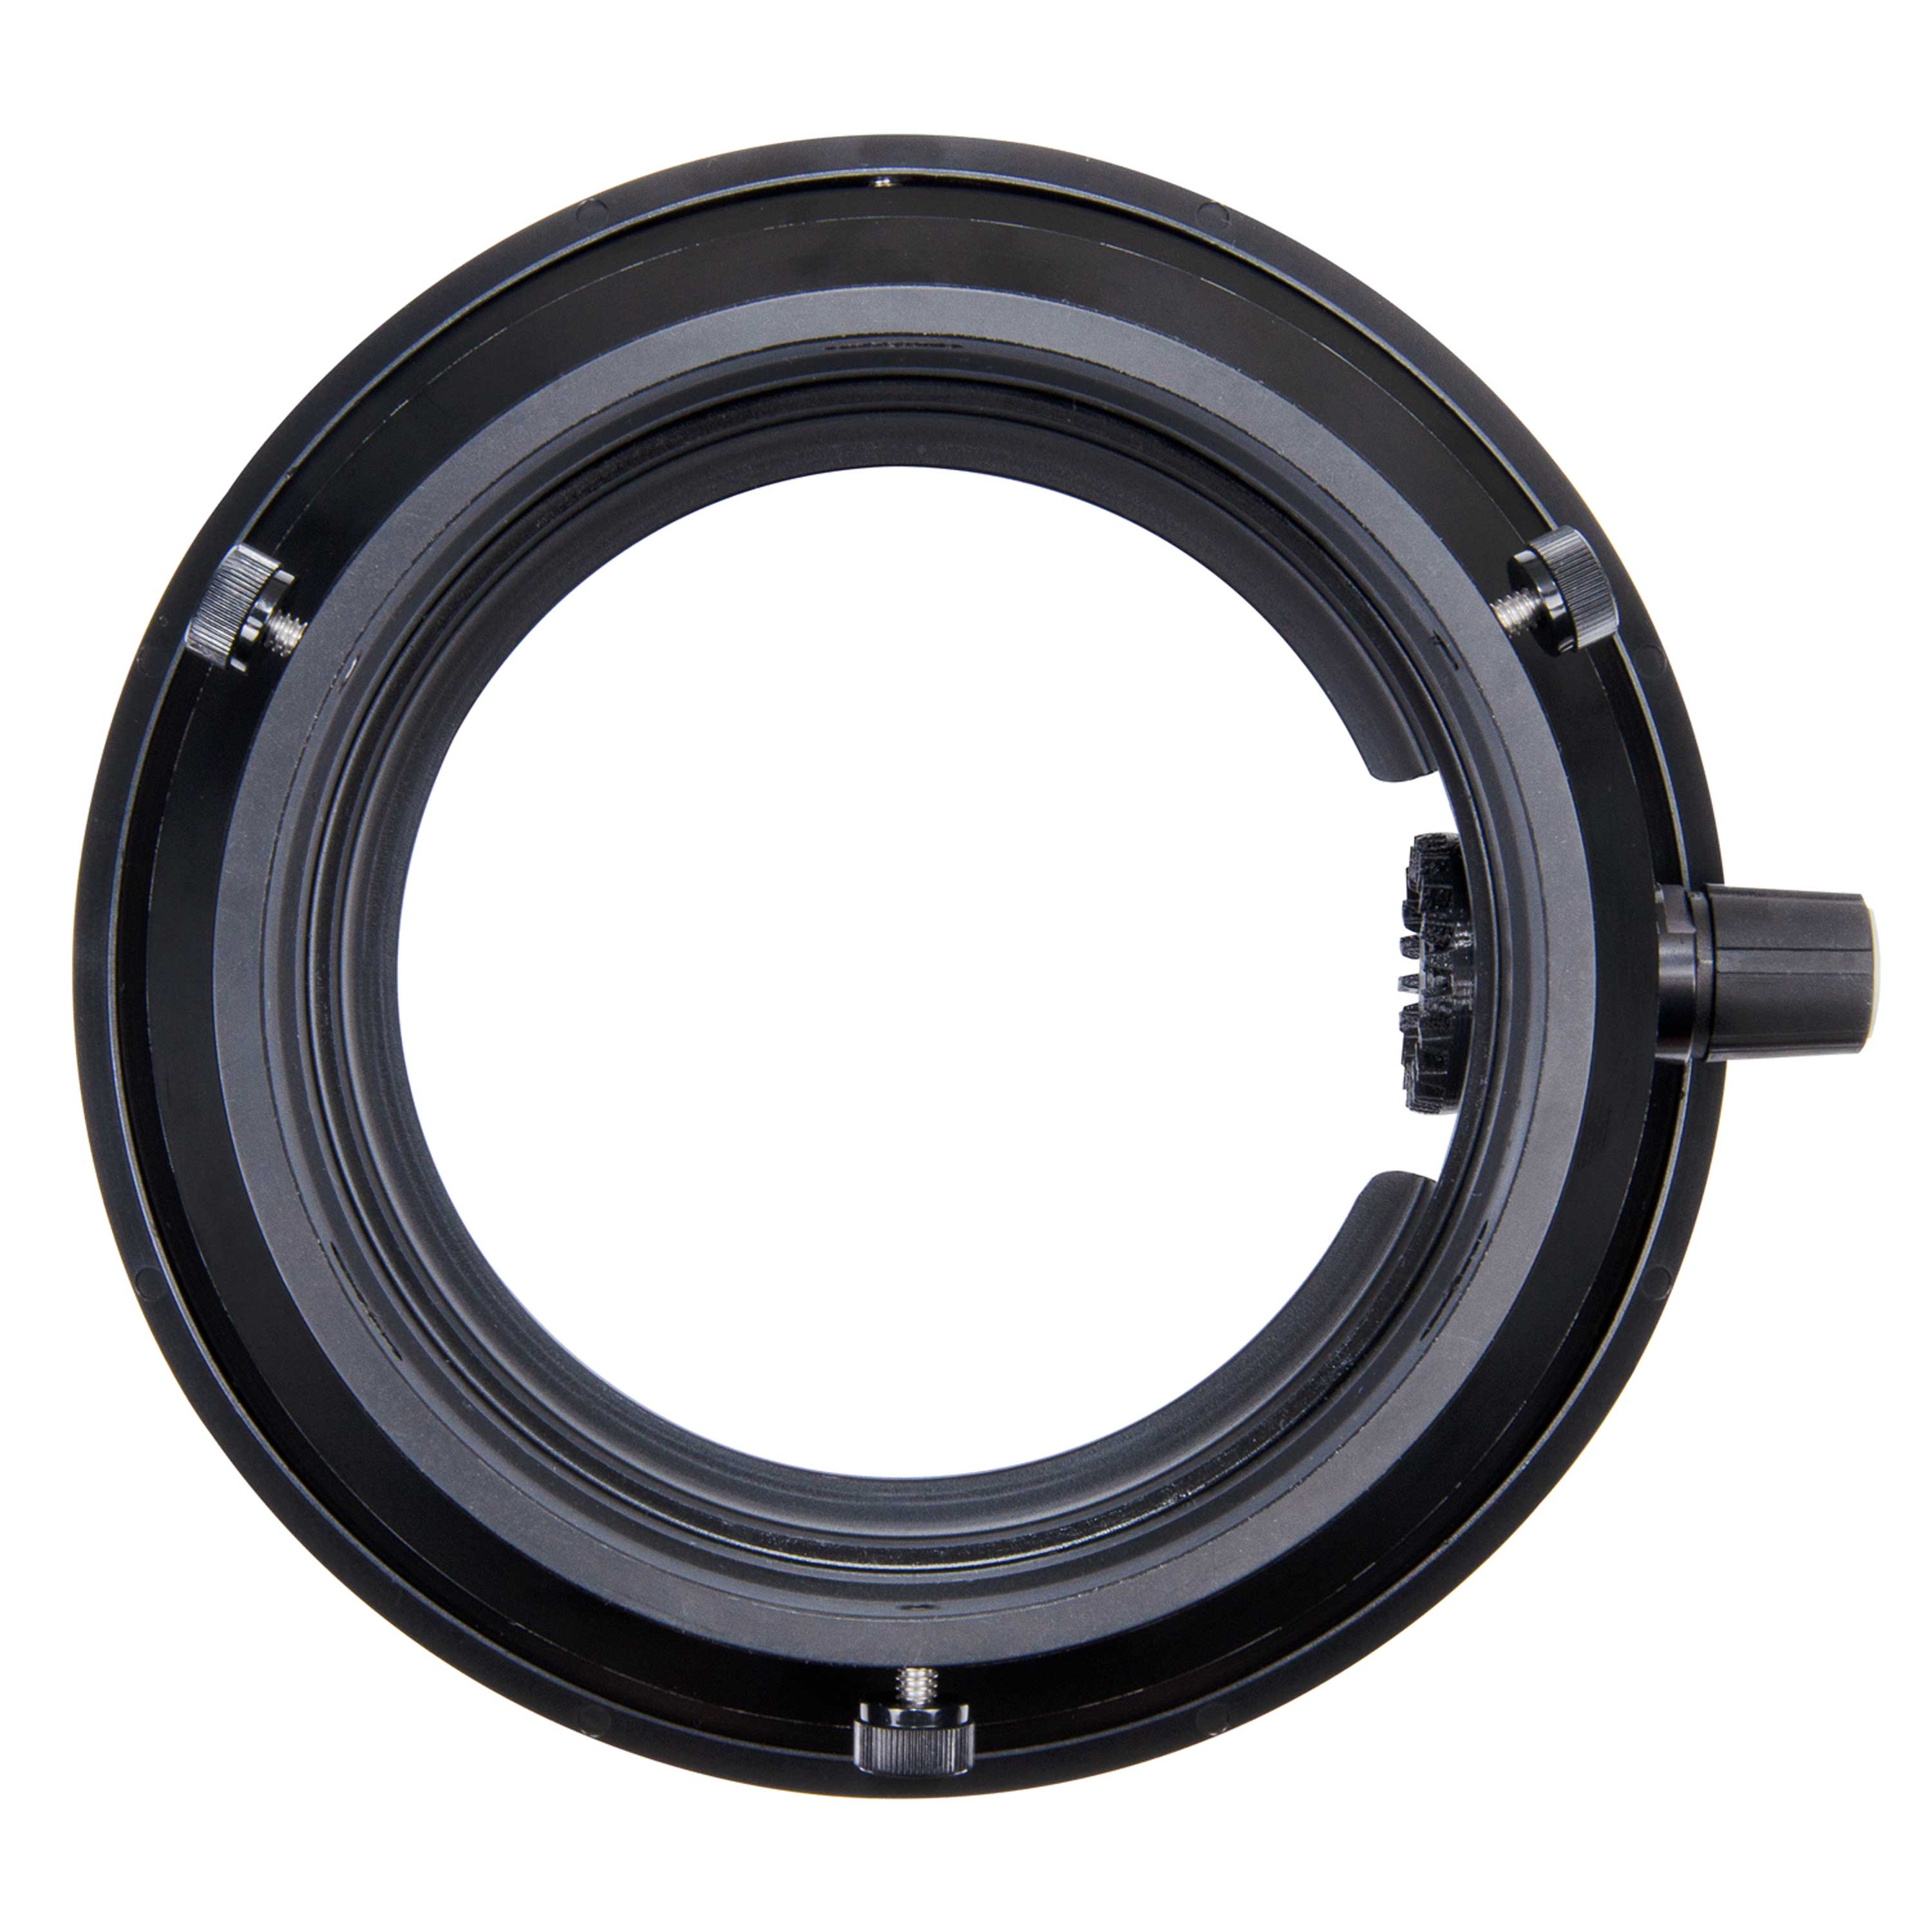 DLM 6 inch Dome Port with Zoom